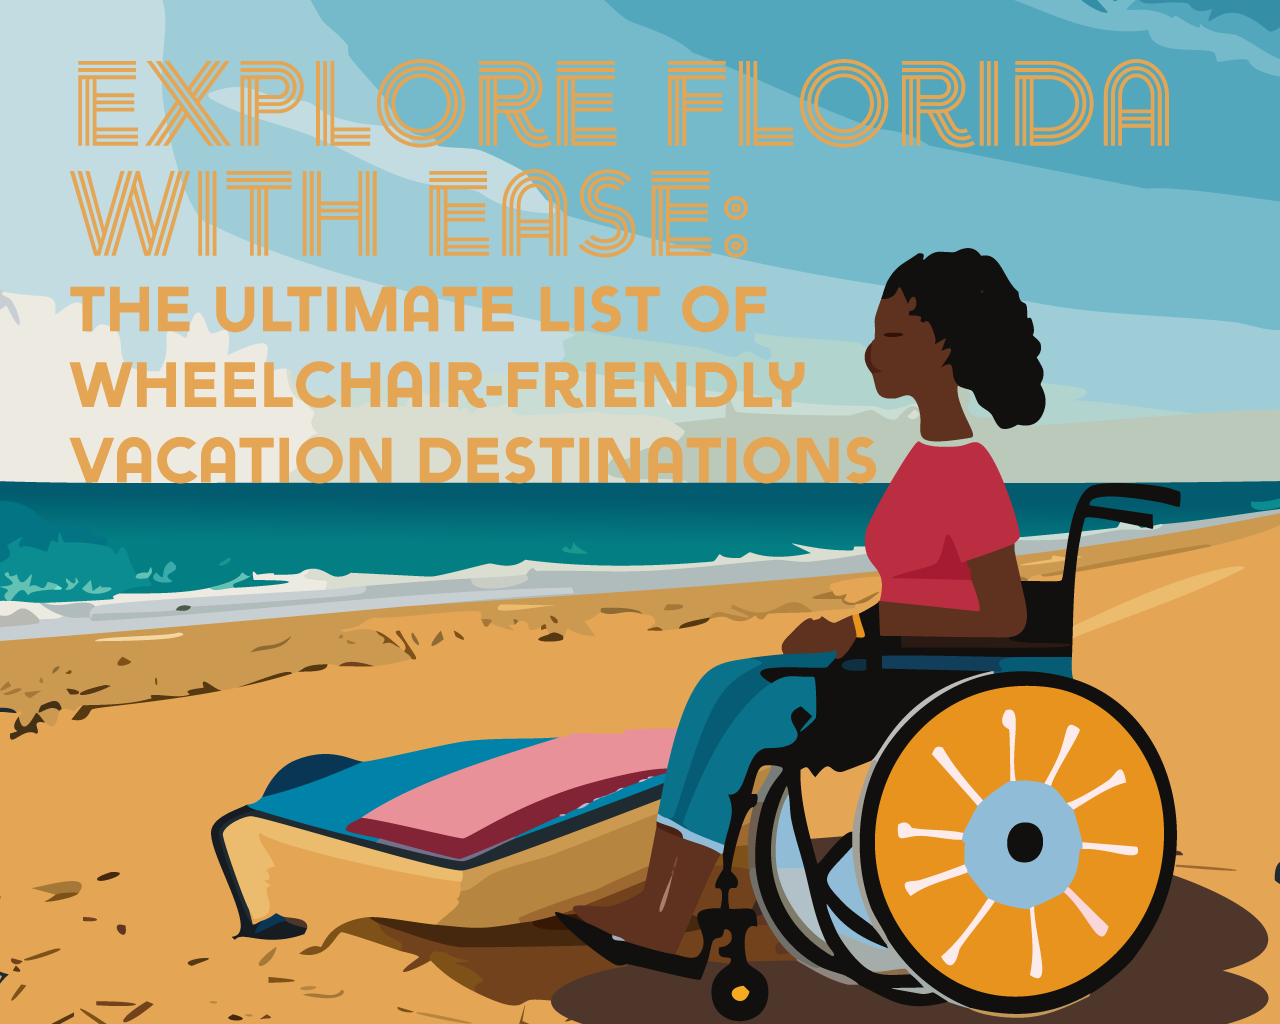 Explore Florida with Ease: The Ultimate List of Wheelchair-Friendly Vacation Destinations